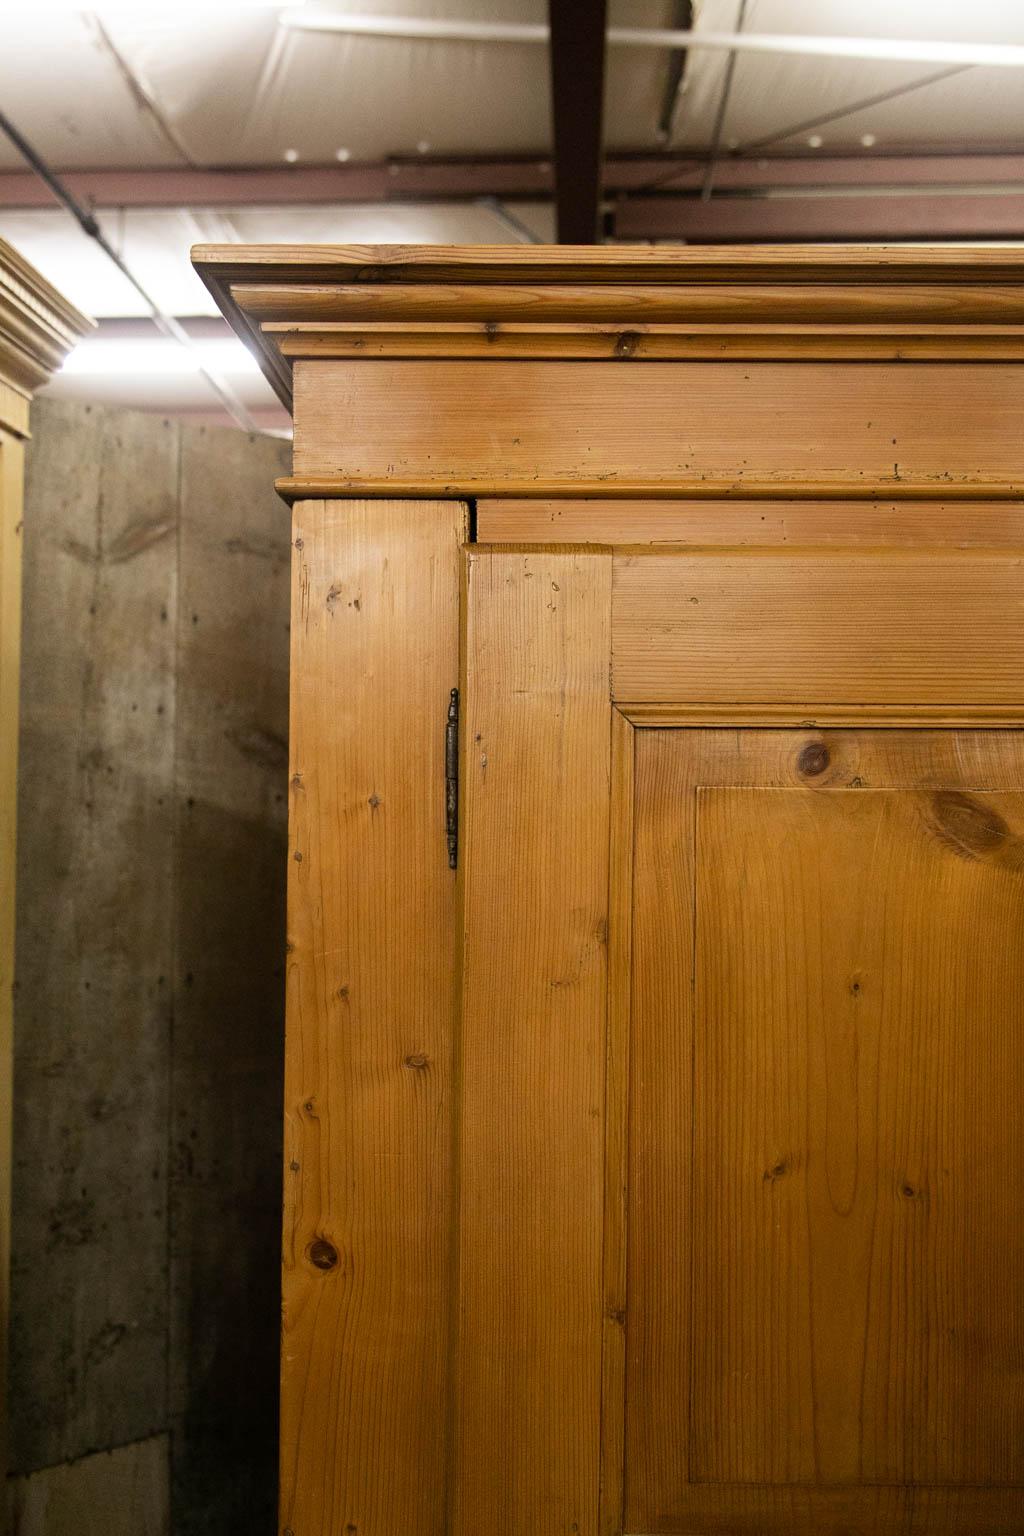 The interior of this armoire is open. The doors have two raised panels framed with carved moldings. The sides have one long panel framed with carved molding. There are two working drawers below the doors in the base which terminates in bun feet.